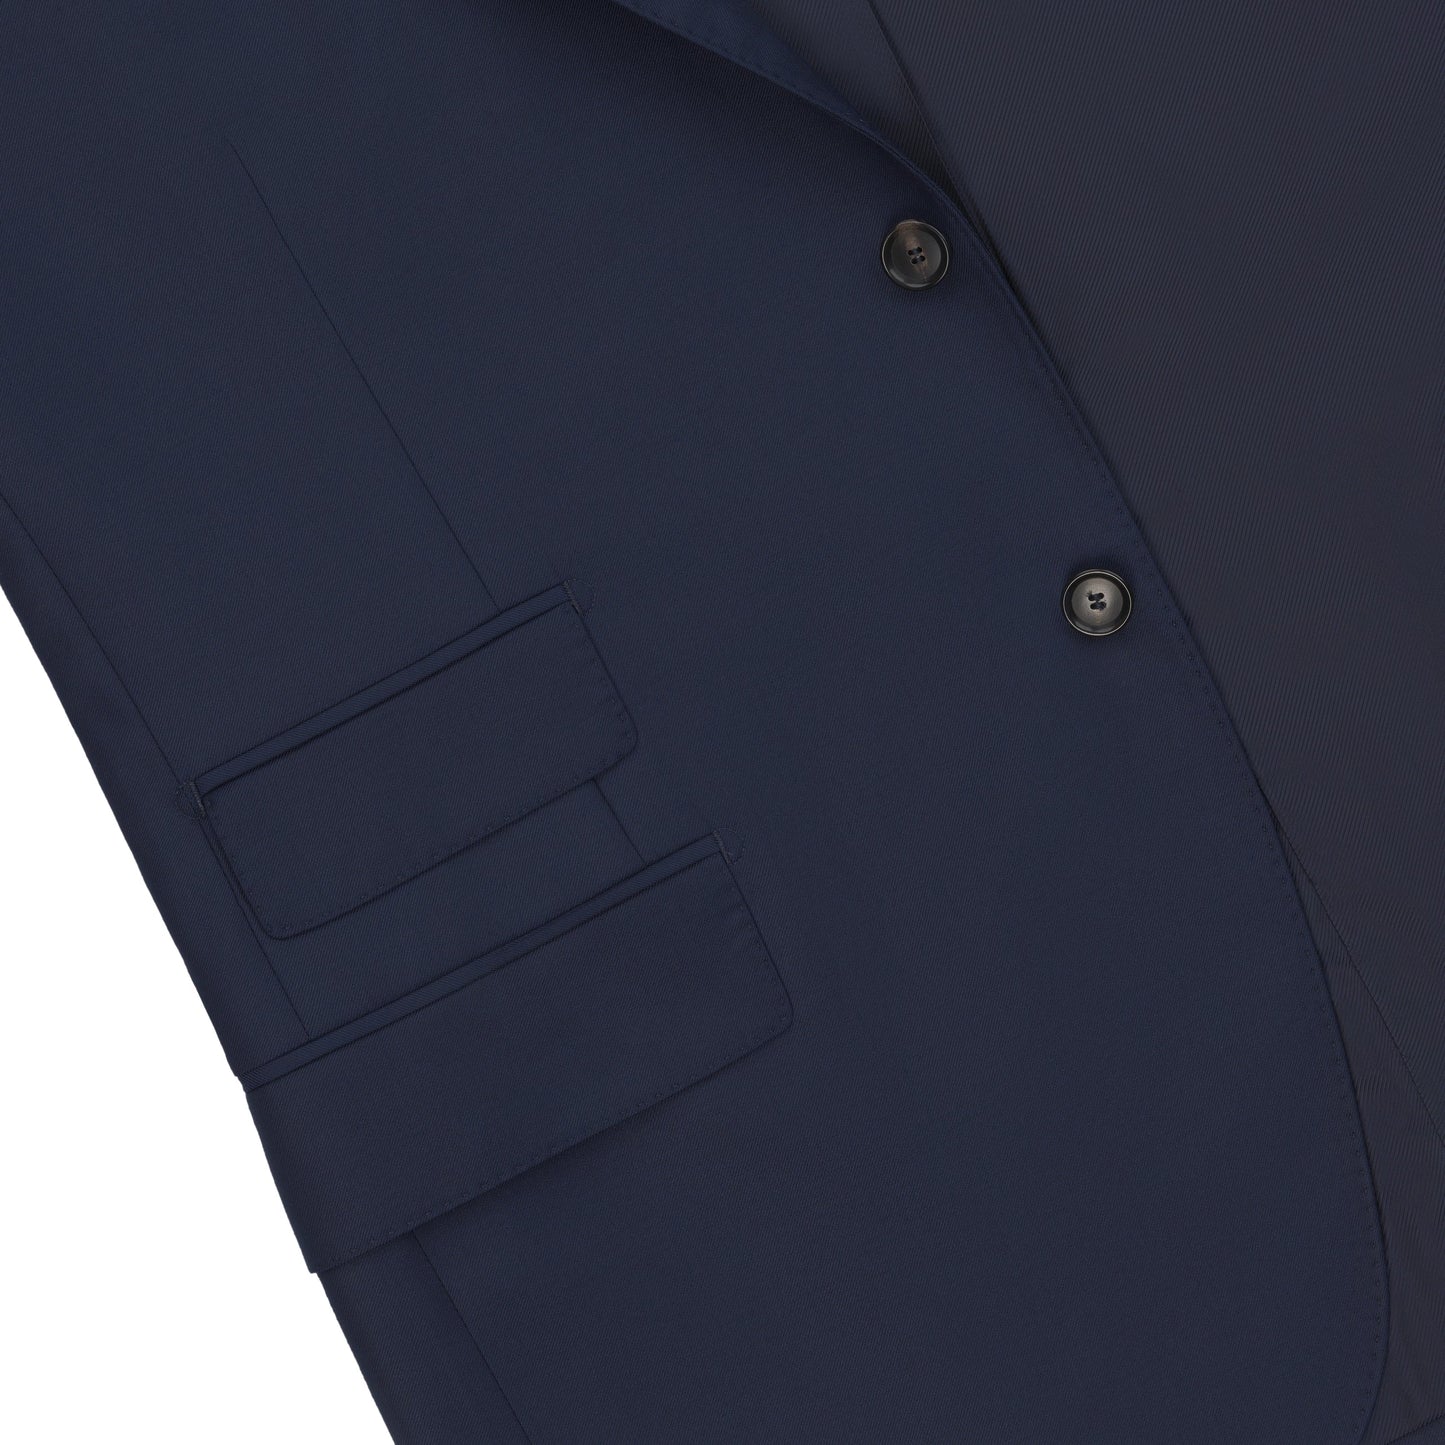 De Petrillo Single - Breasted Wool Suit in Navy Blue. Exclusively Made for Sartale - SARTALE